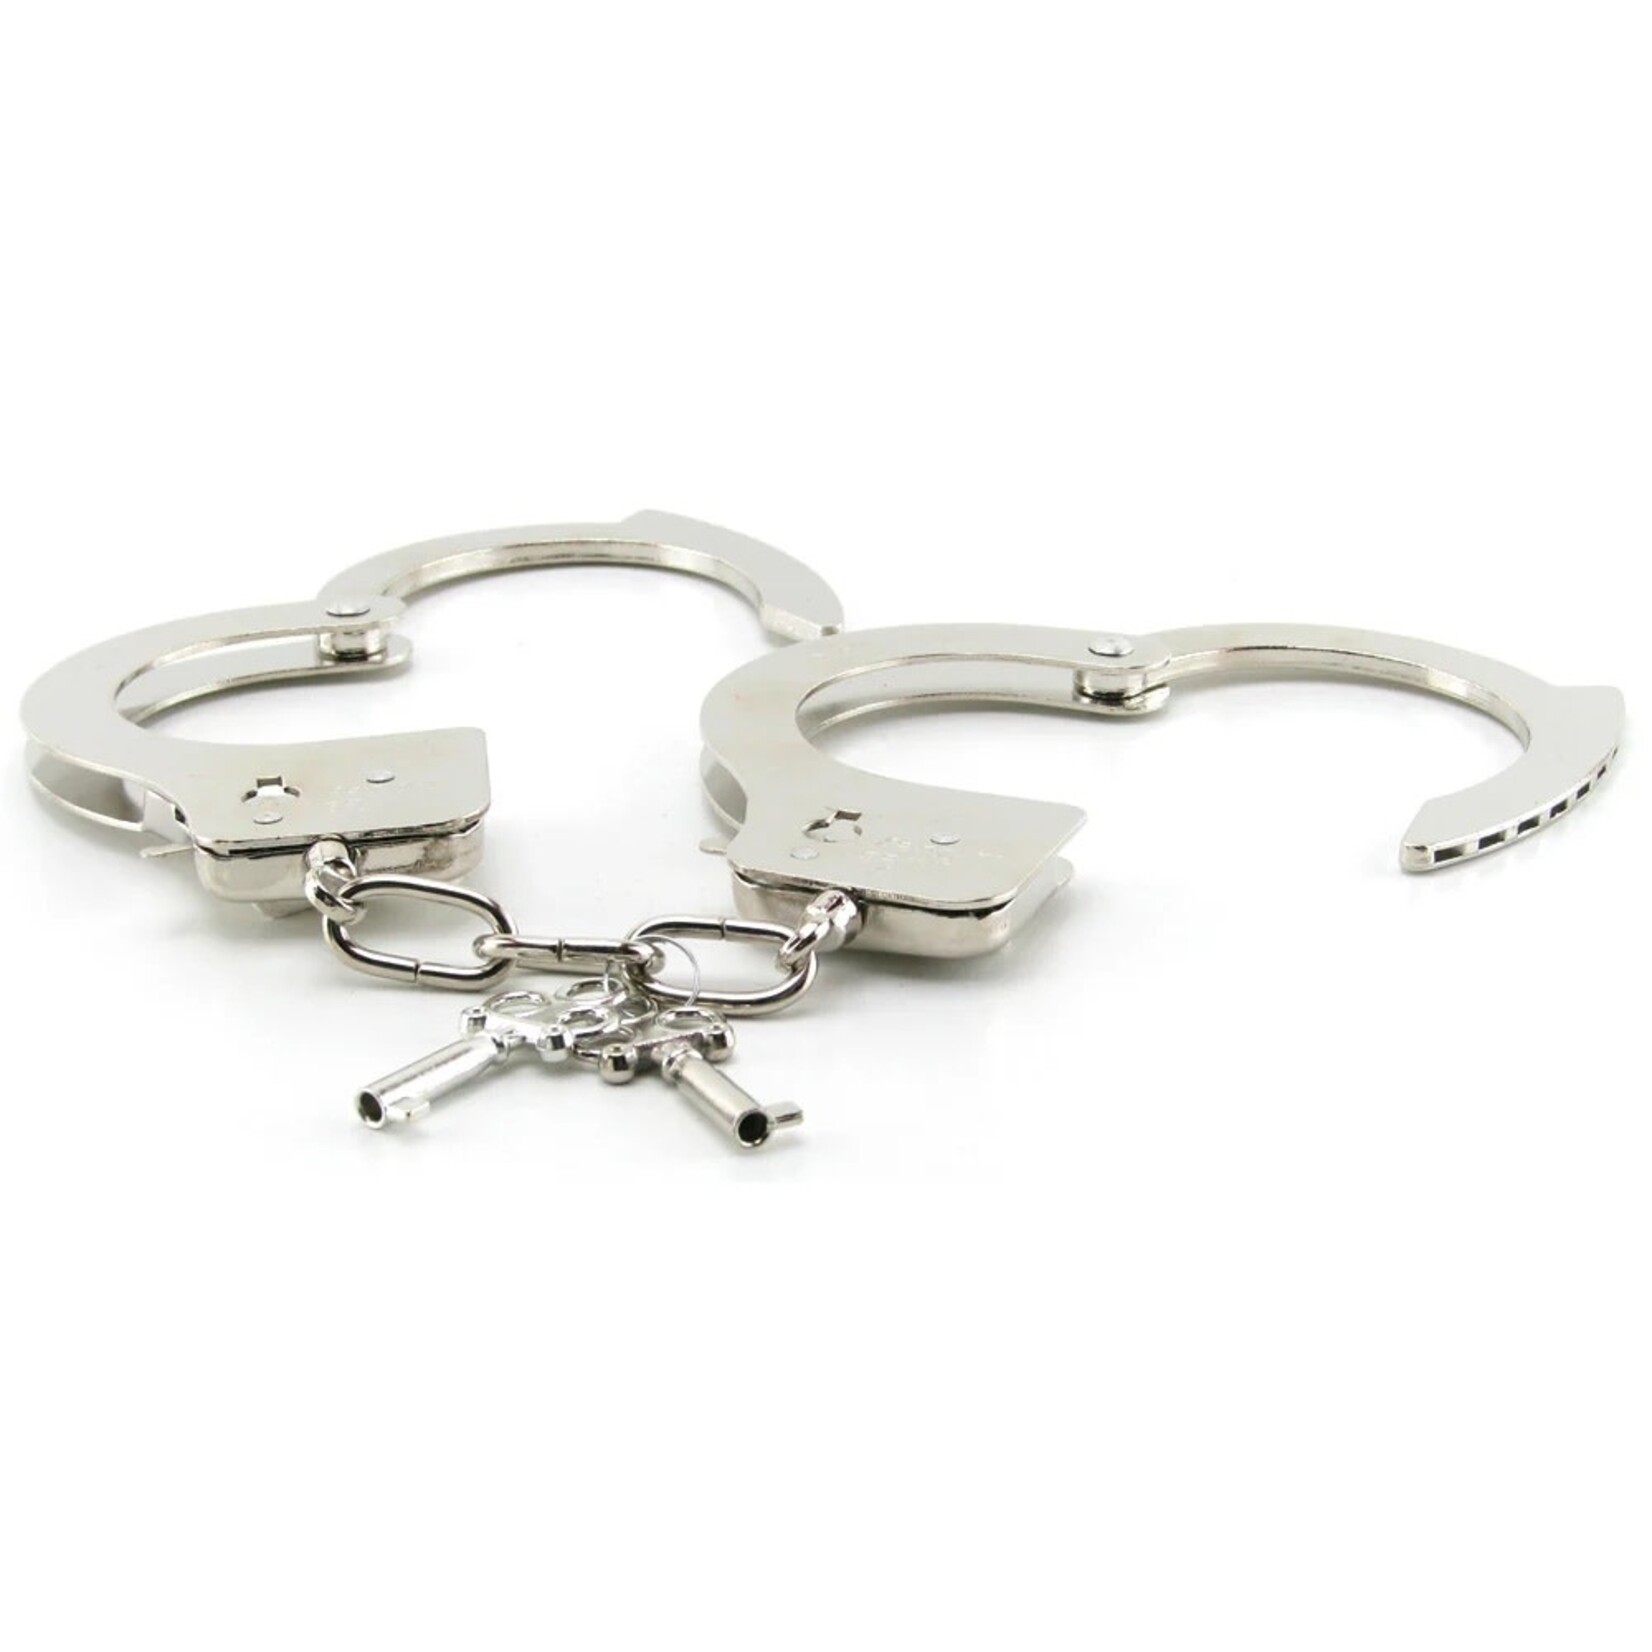 YOU ARE MINE METAL HANDCUFFS